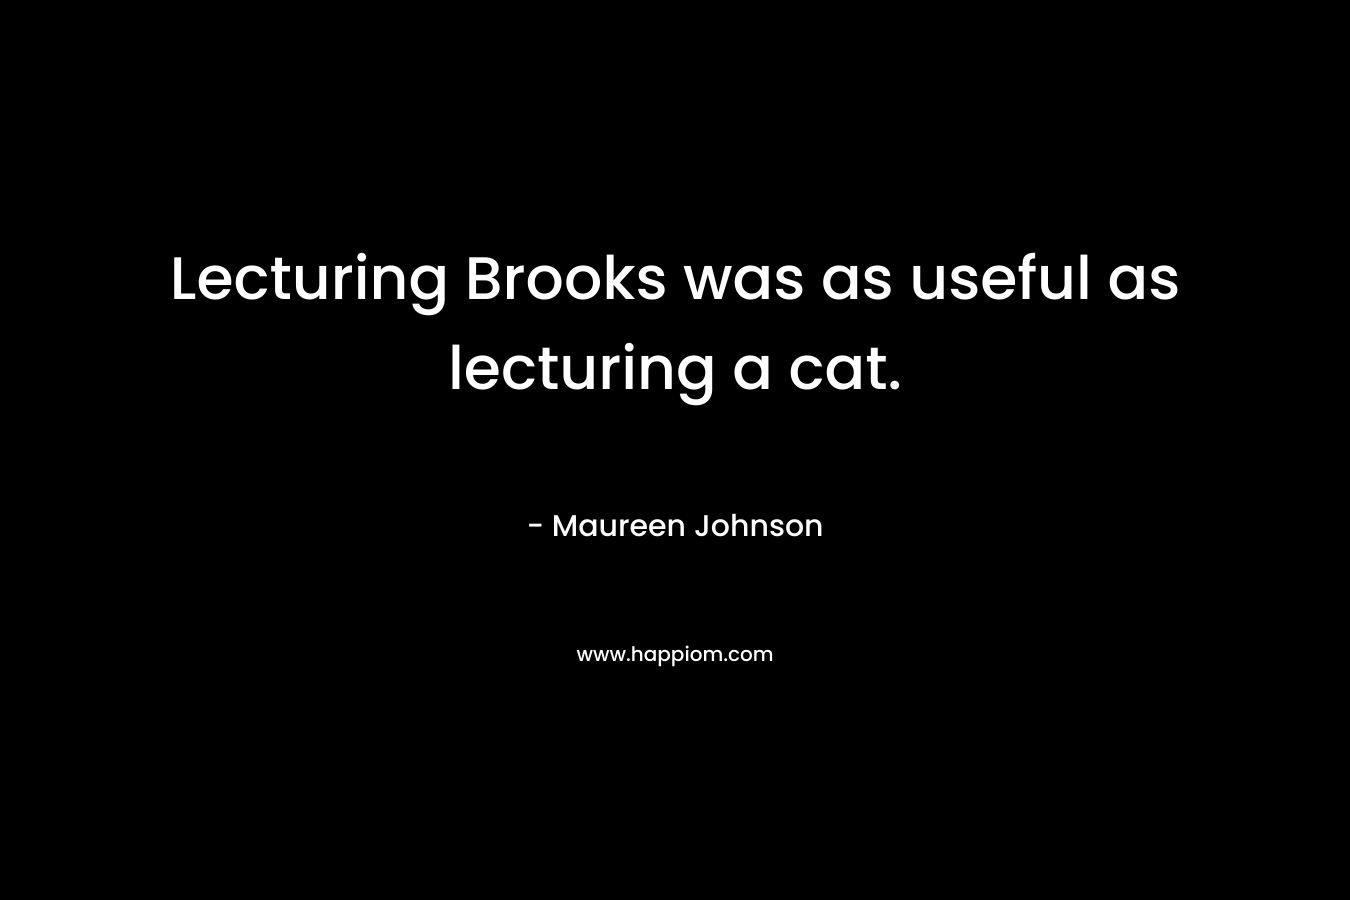 Lecturing Brooks was as useful as lecturing a cat.